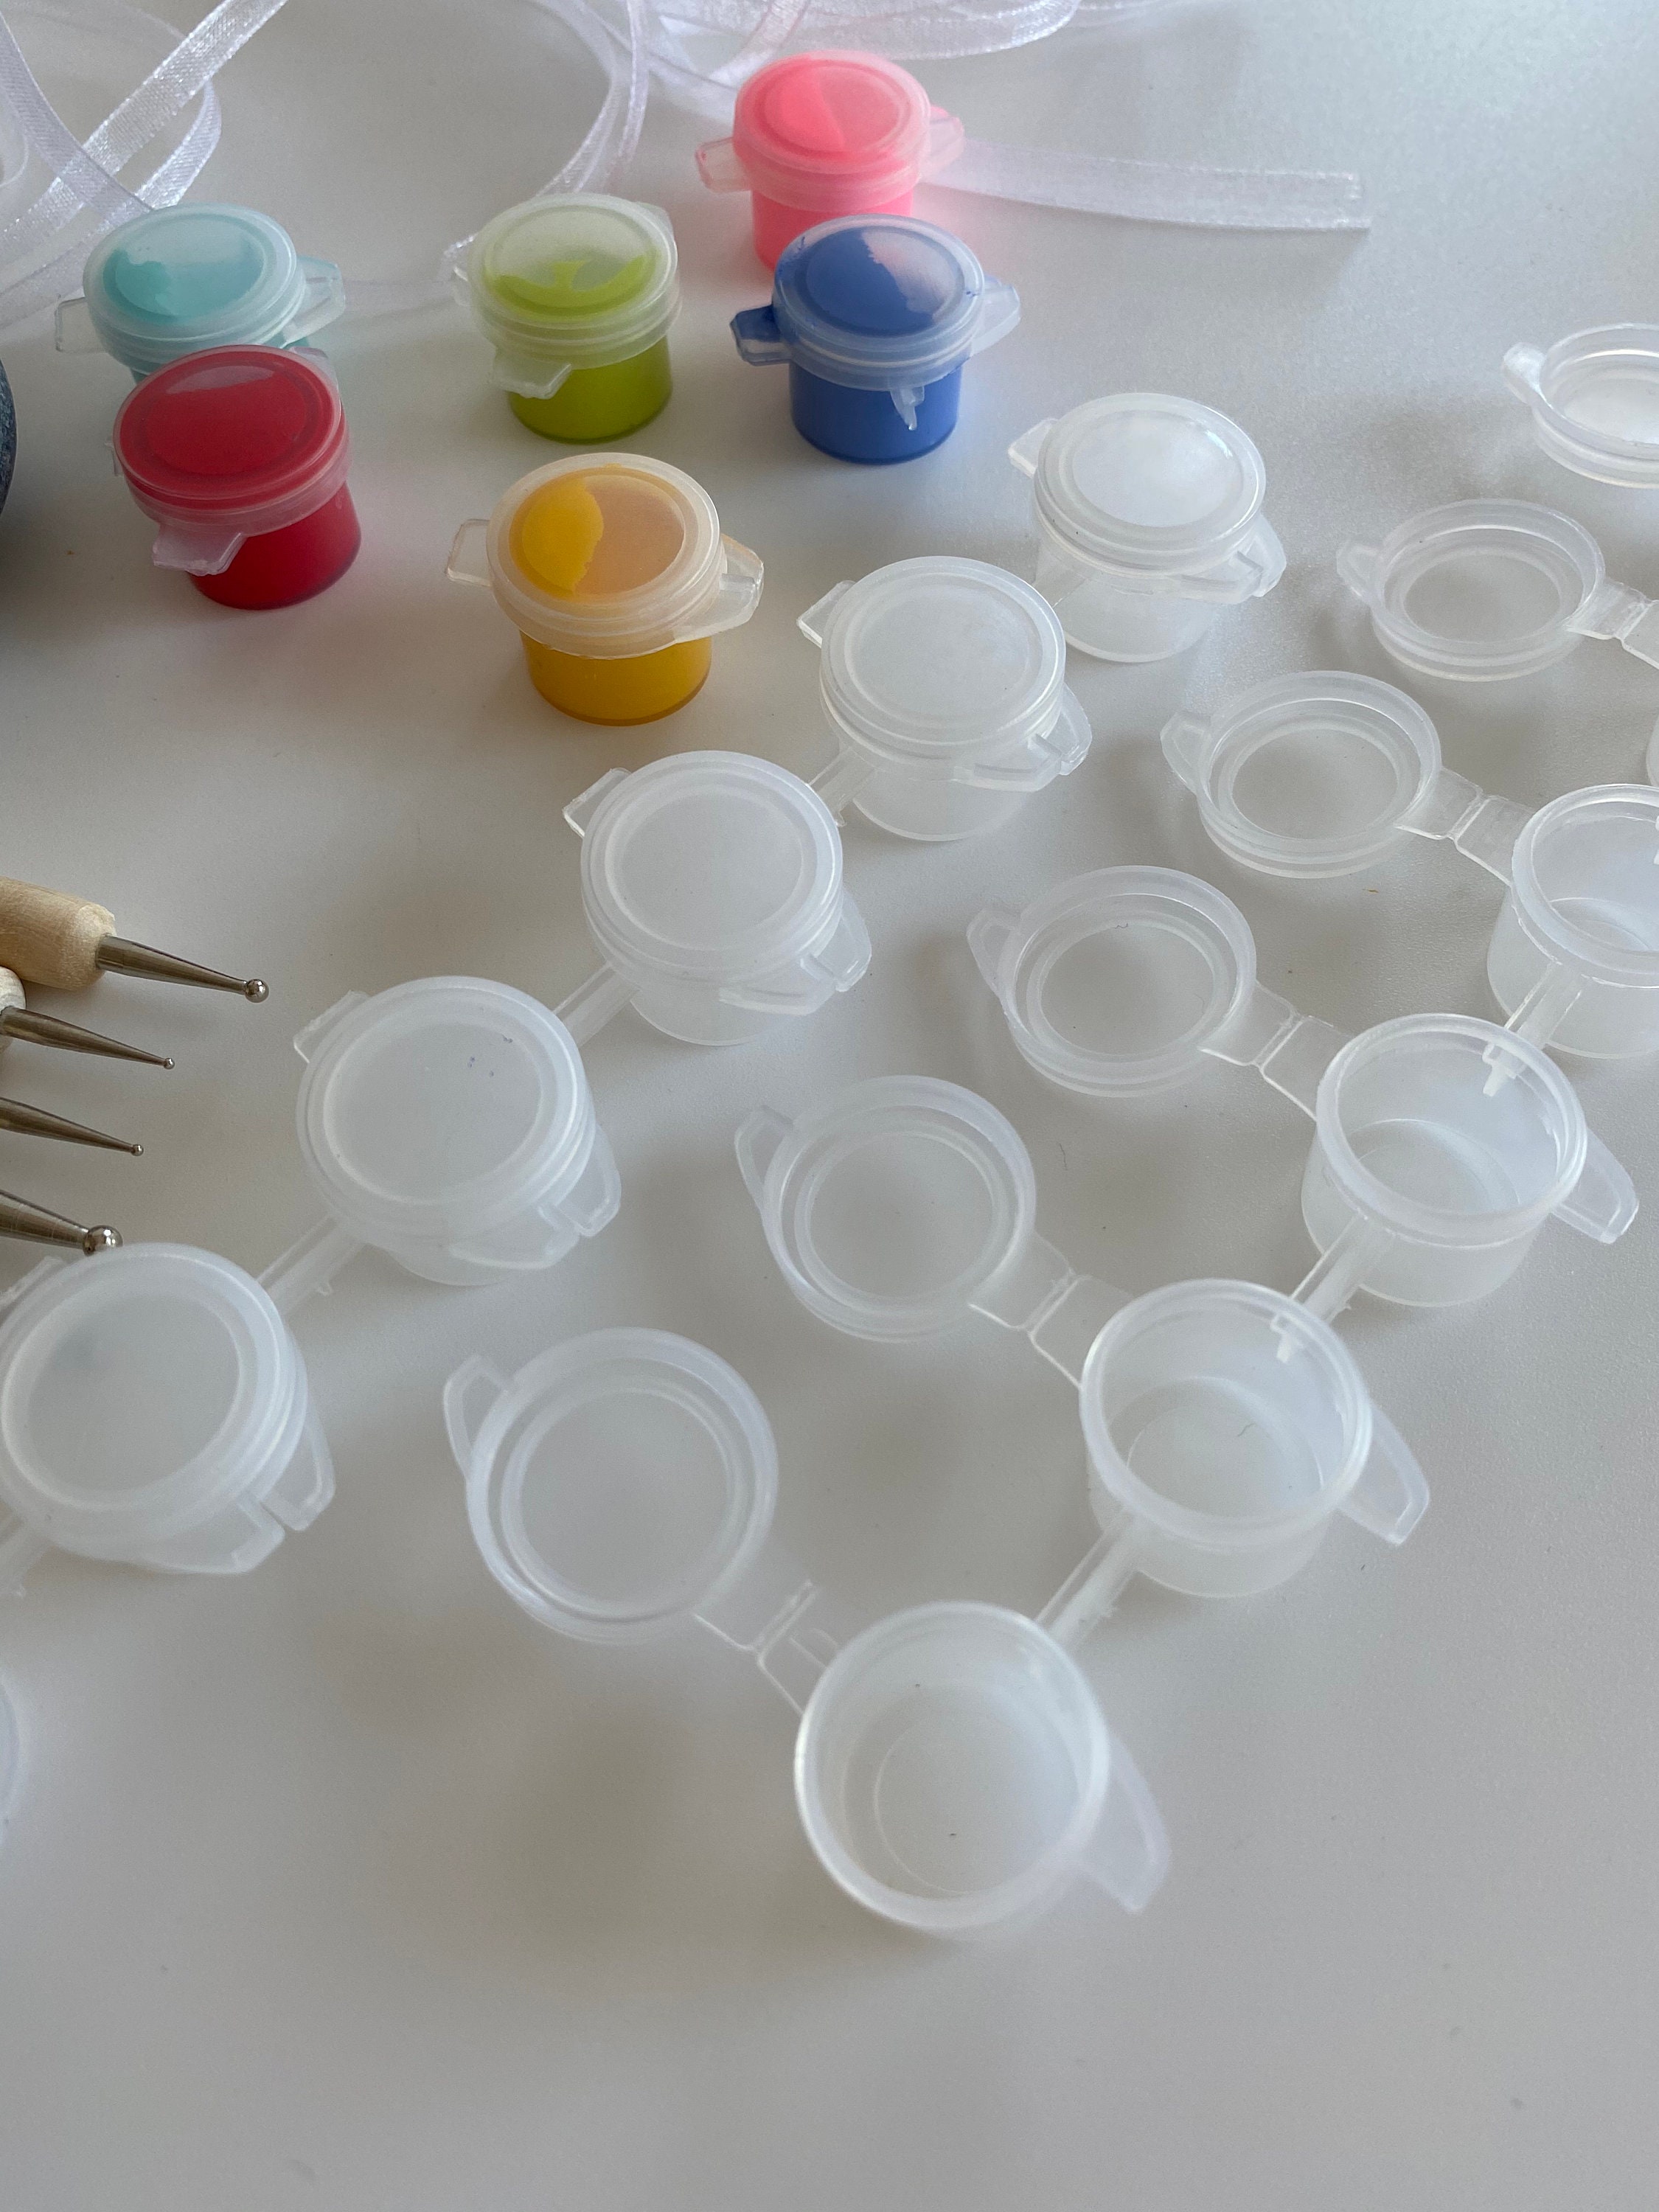 Mini Paint Pots for Mandalas or Bead Storage with Snap Shut Lids - 30  Count, Perfect for Leftover Paint Storage